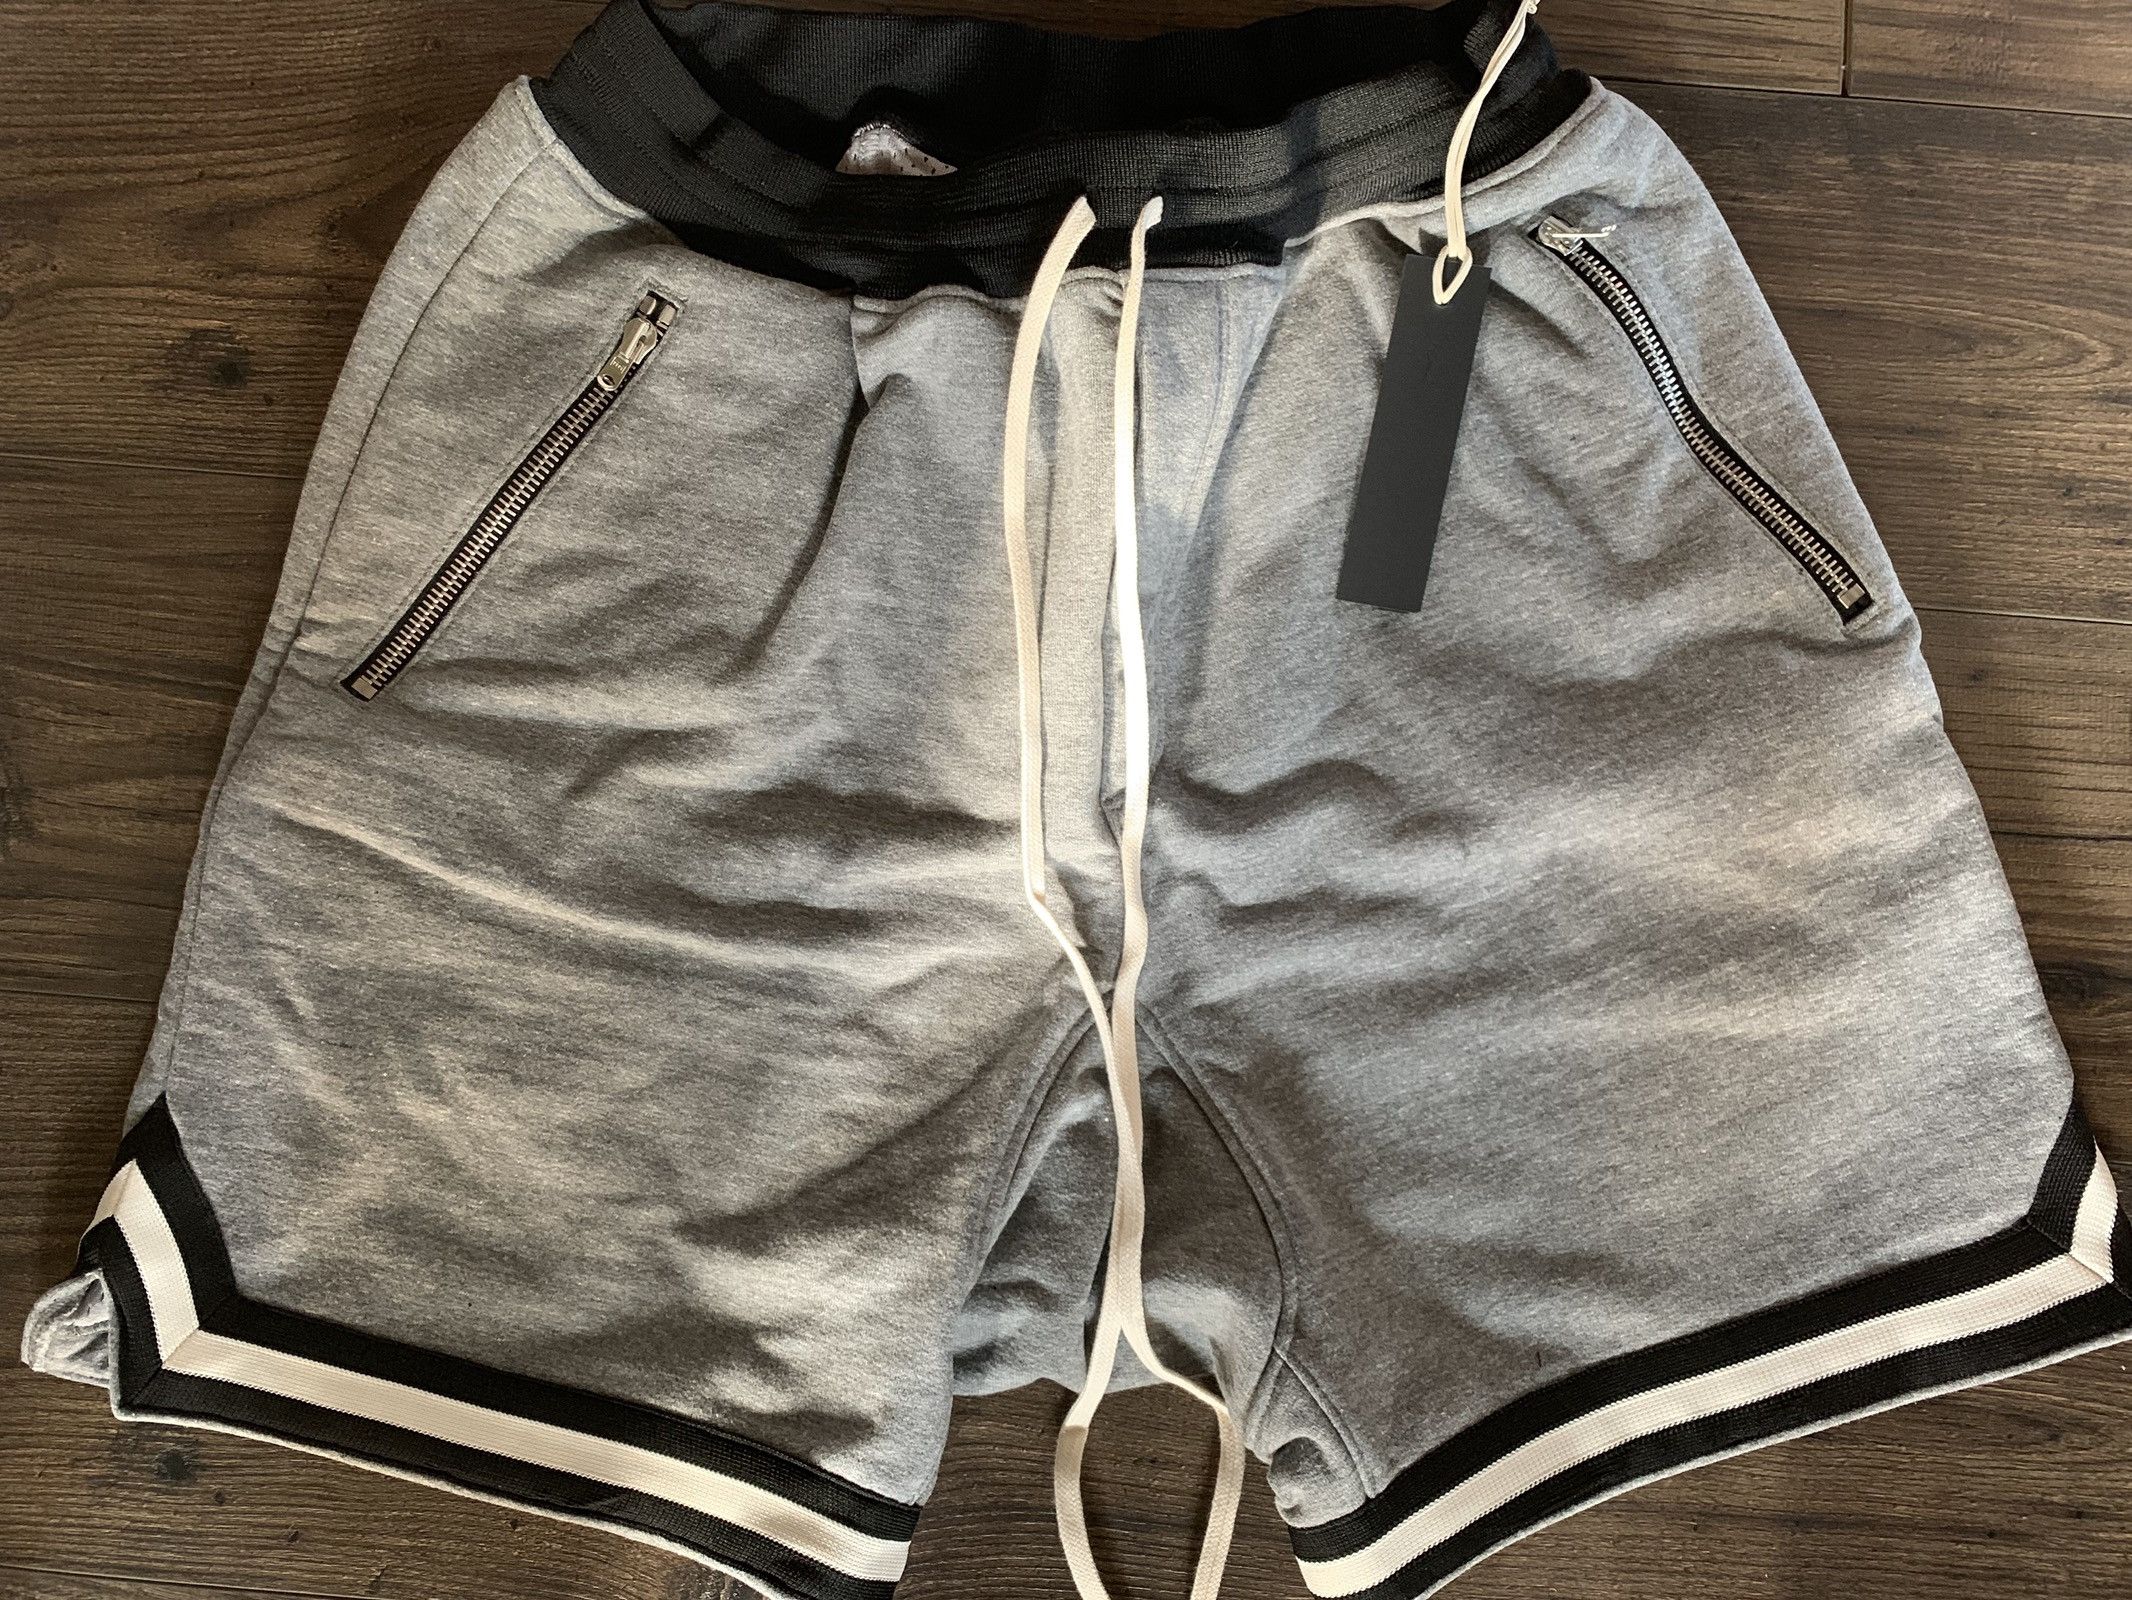 Fear of God French Terry Basketball Shorts Sz Large | Grailed